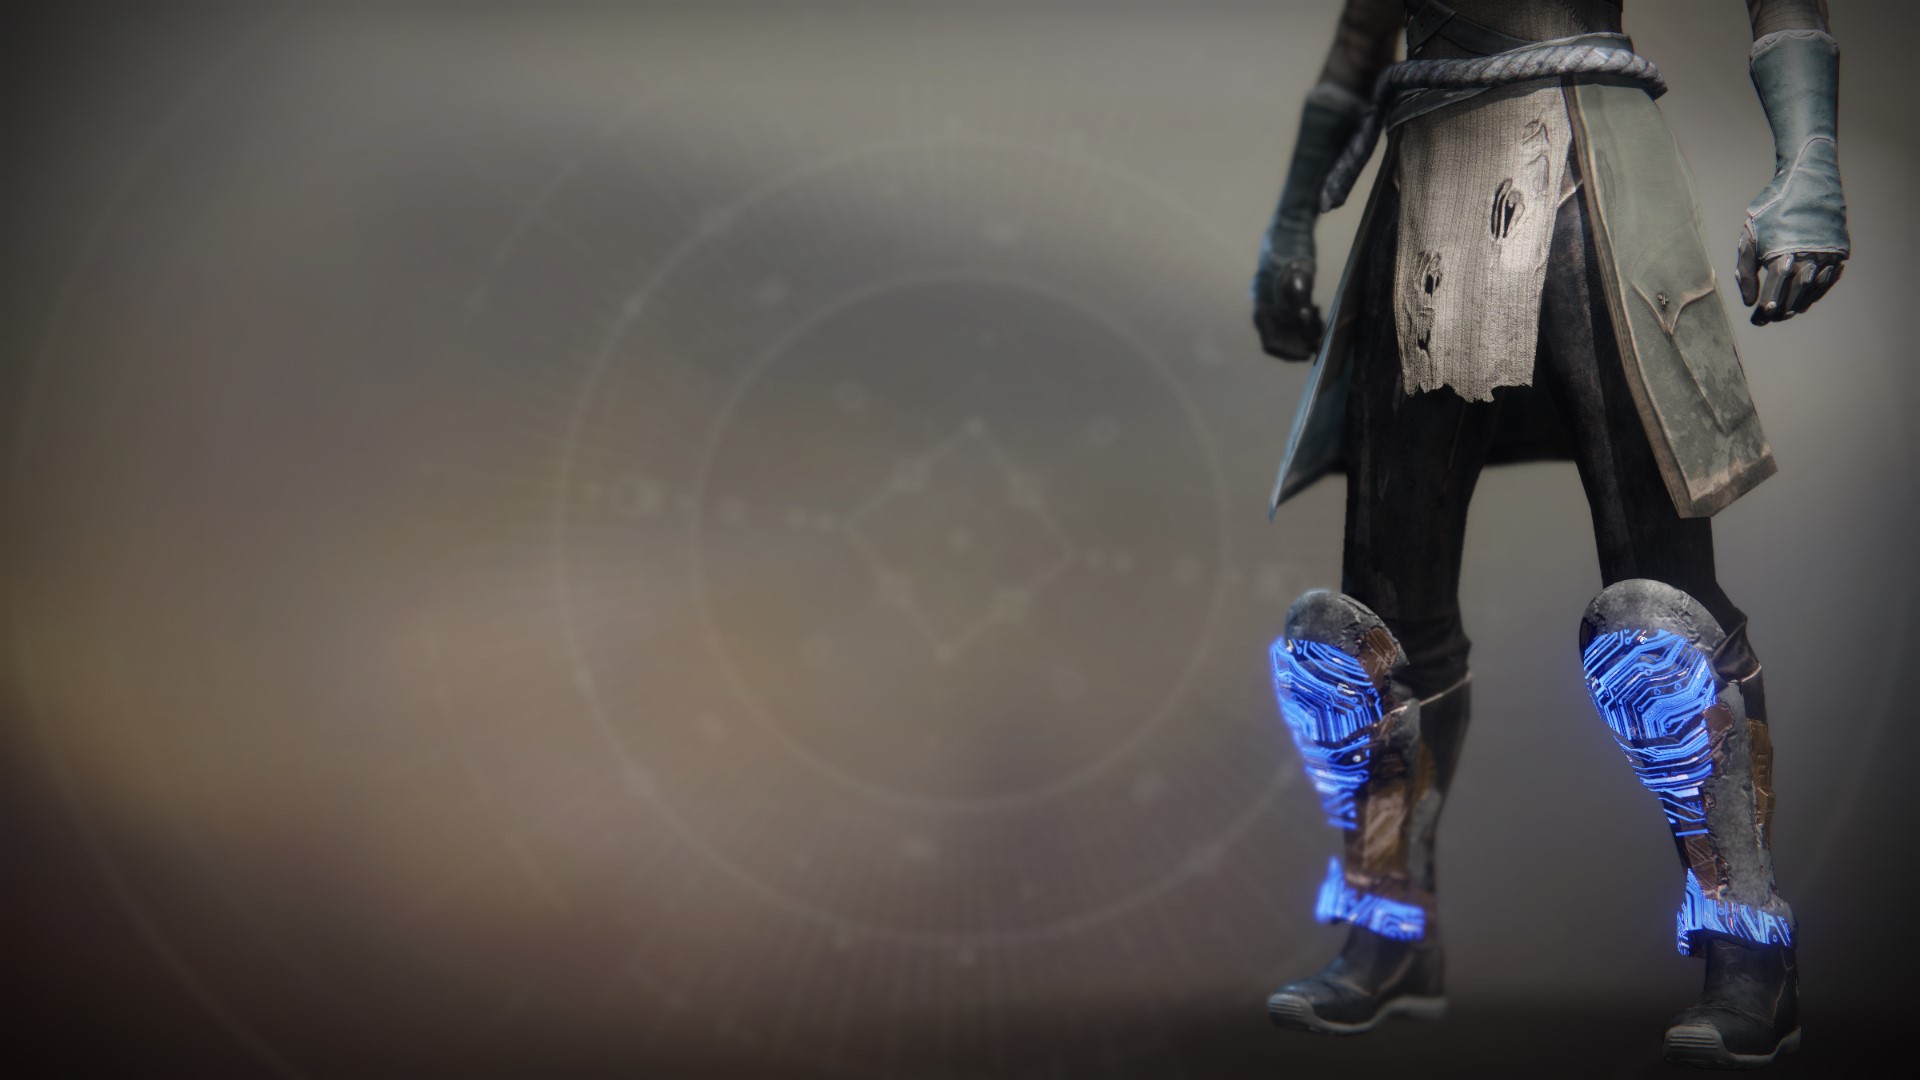 An in-game render of the Boots of Ascendancy.